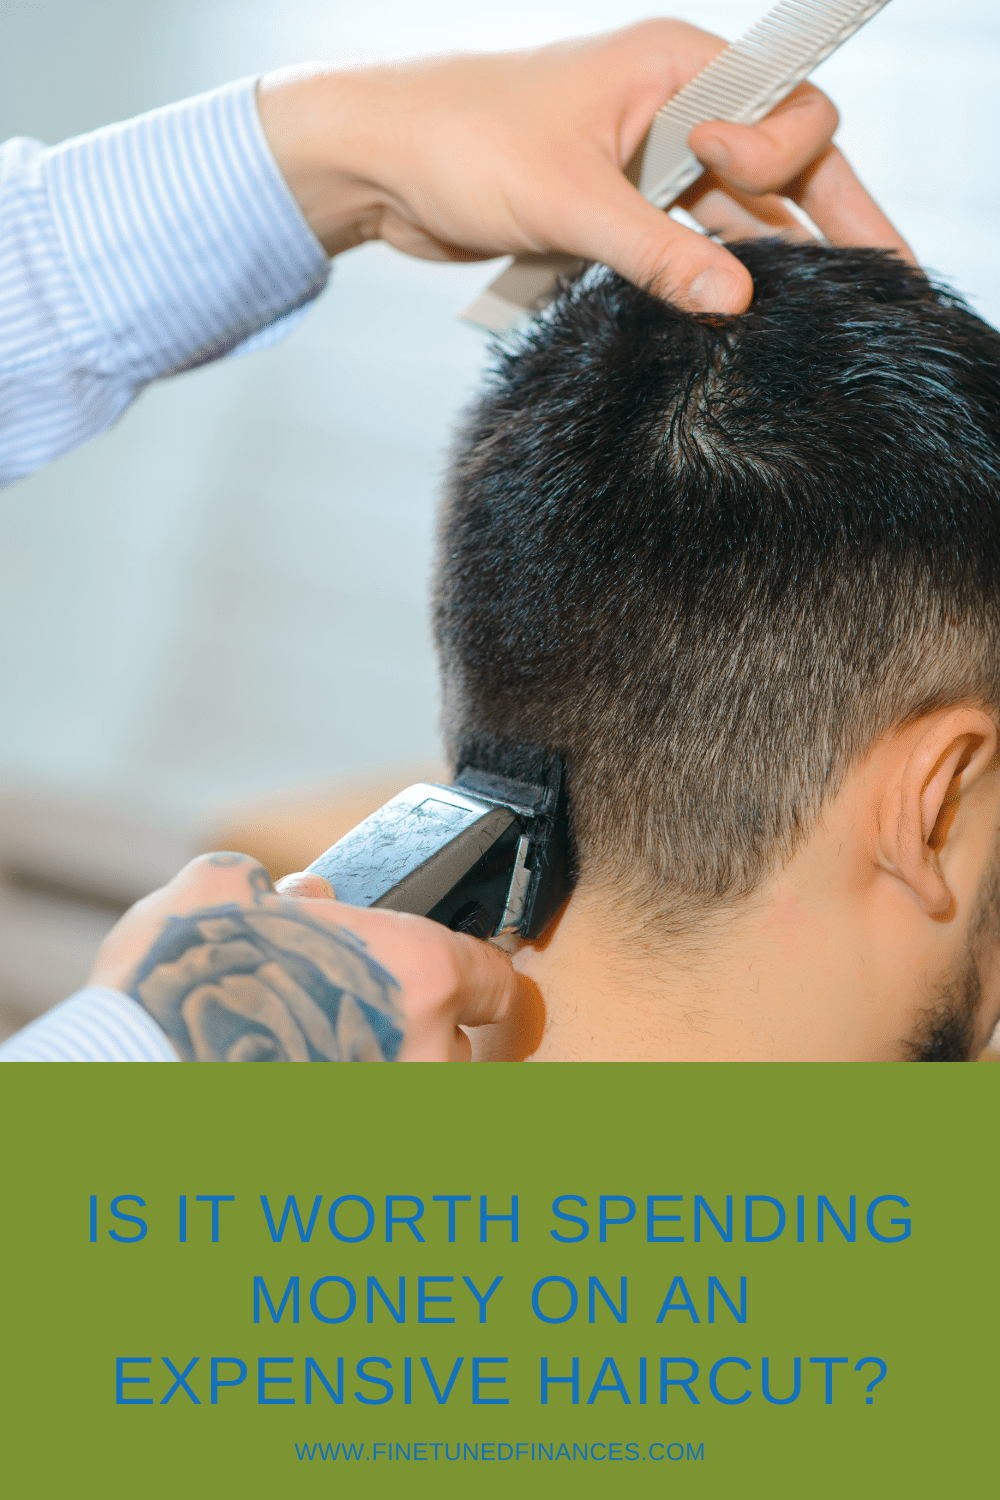 Is It Worth Spending Money on an Expensive Haircut